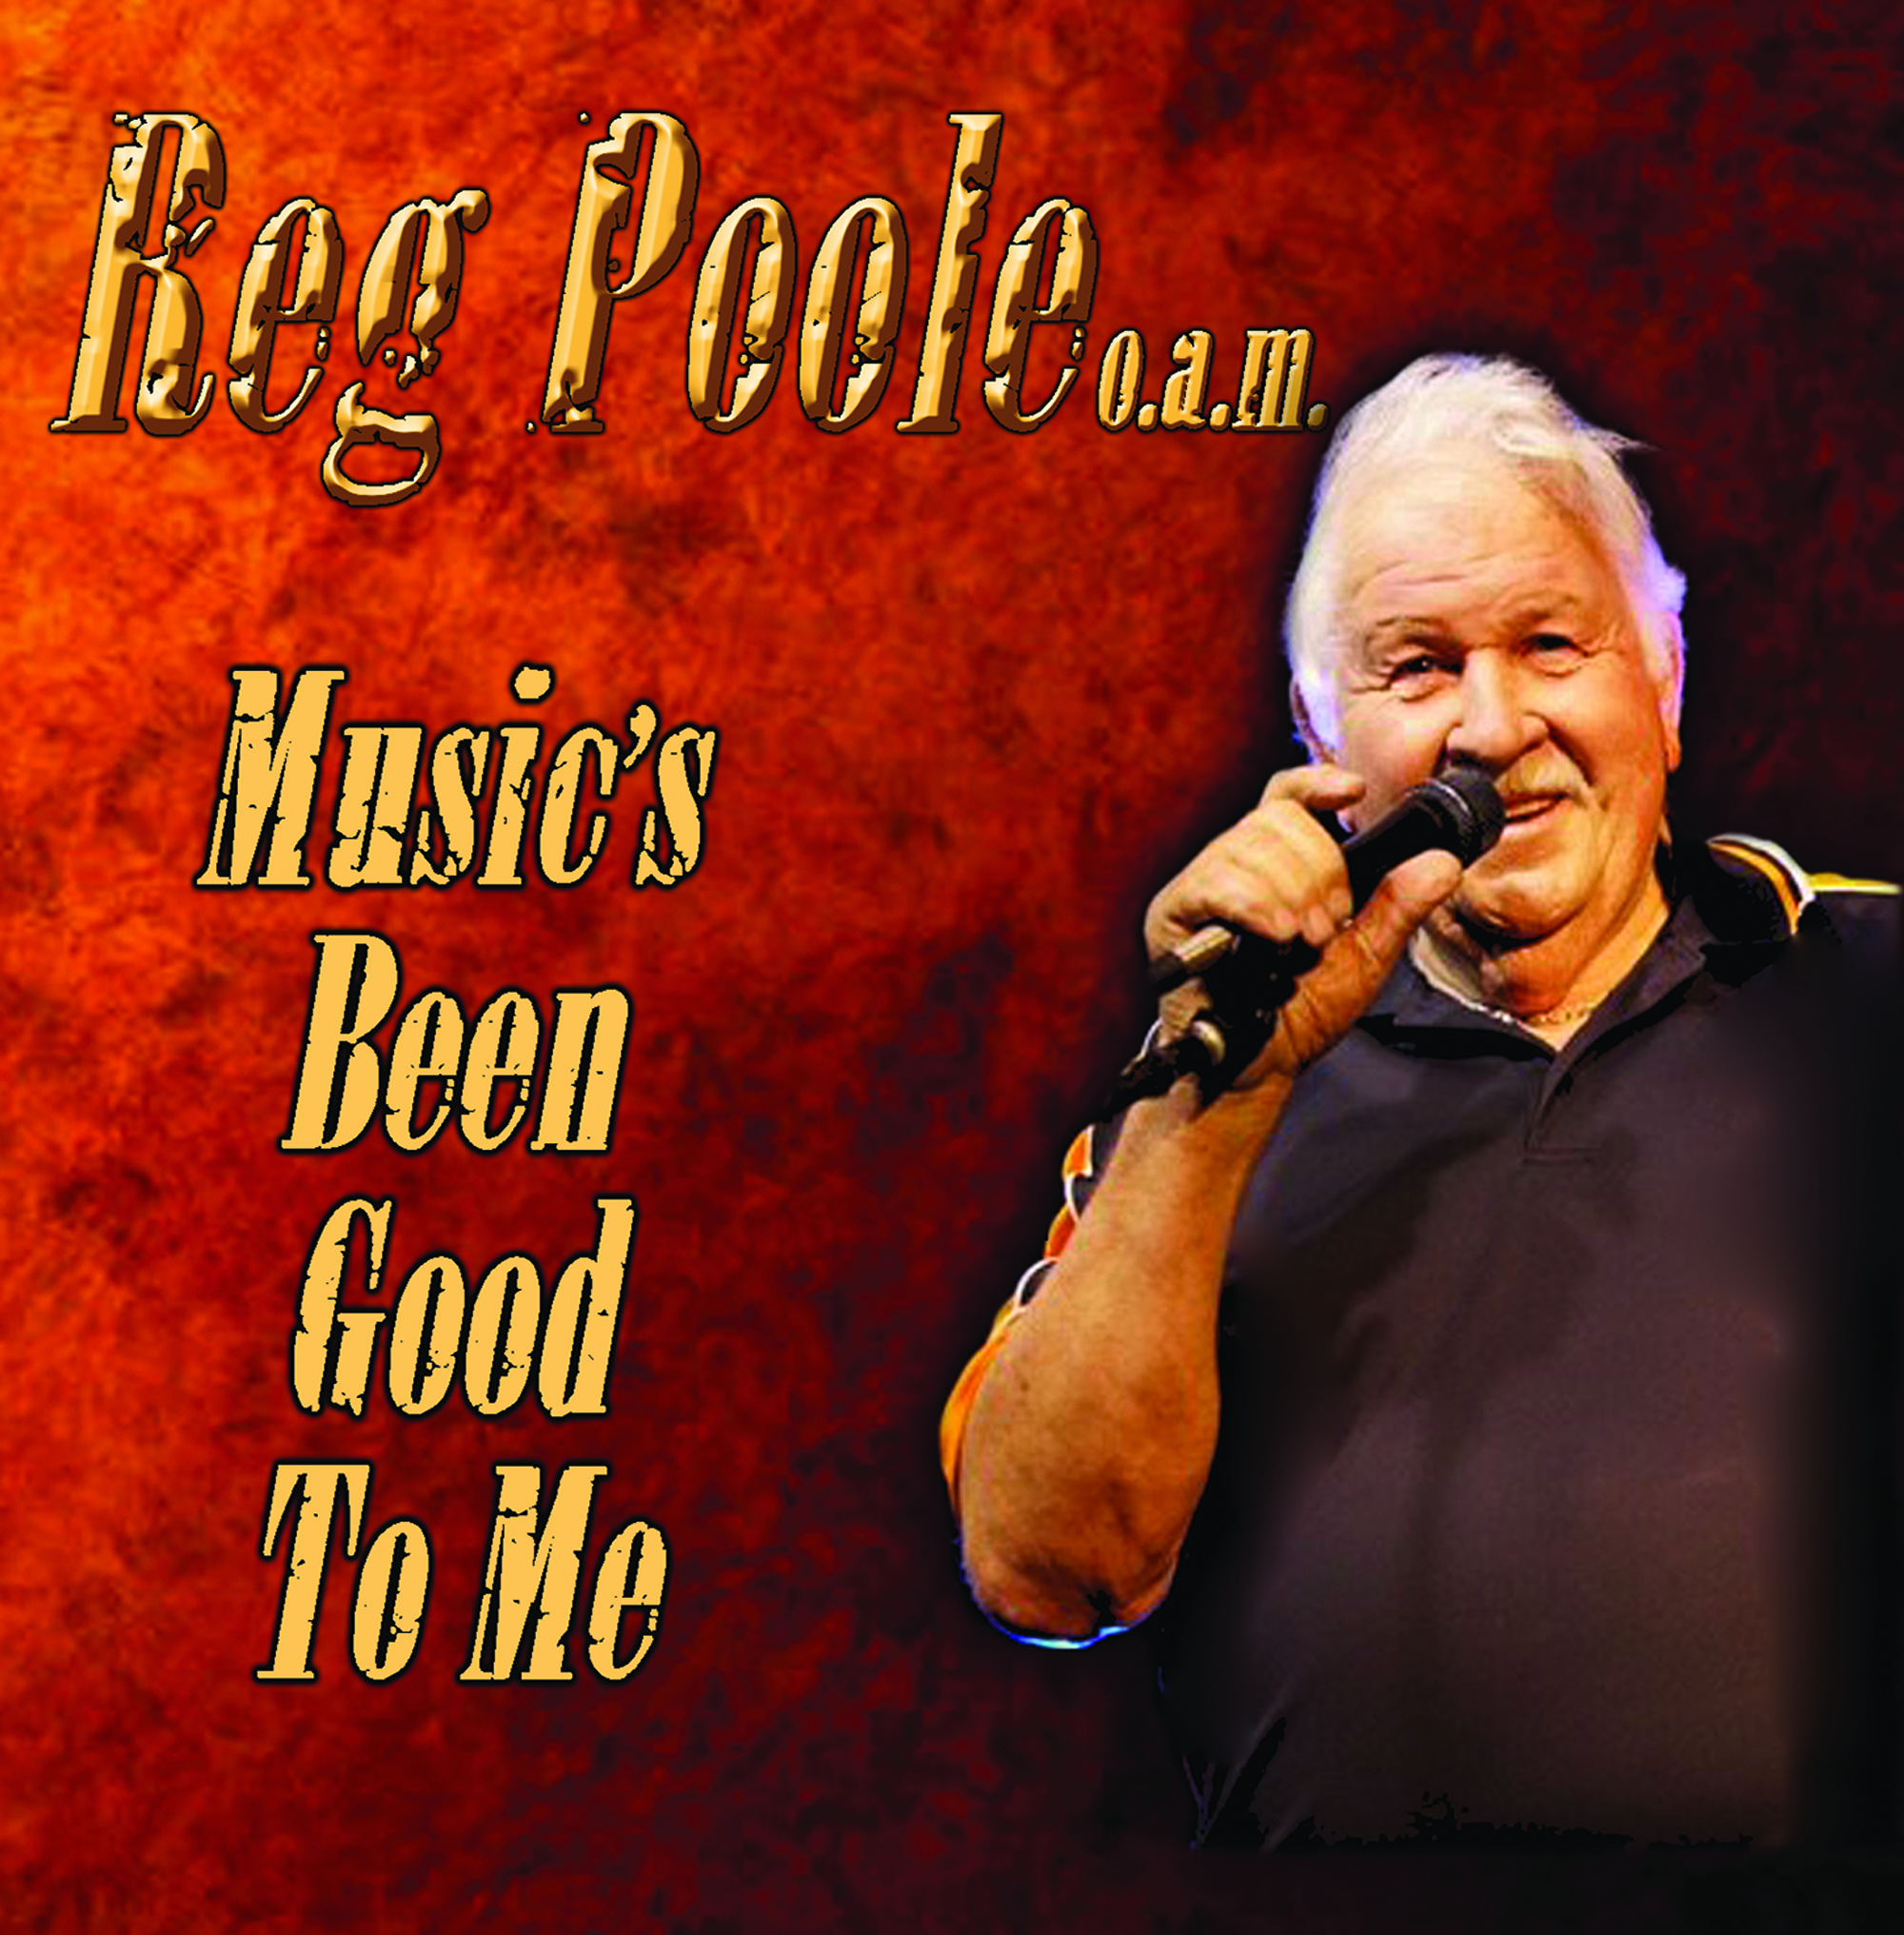 REG POOLE - MUSIC HAS BEEN GOOD TO ME